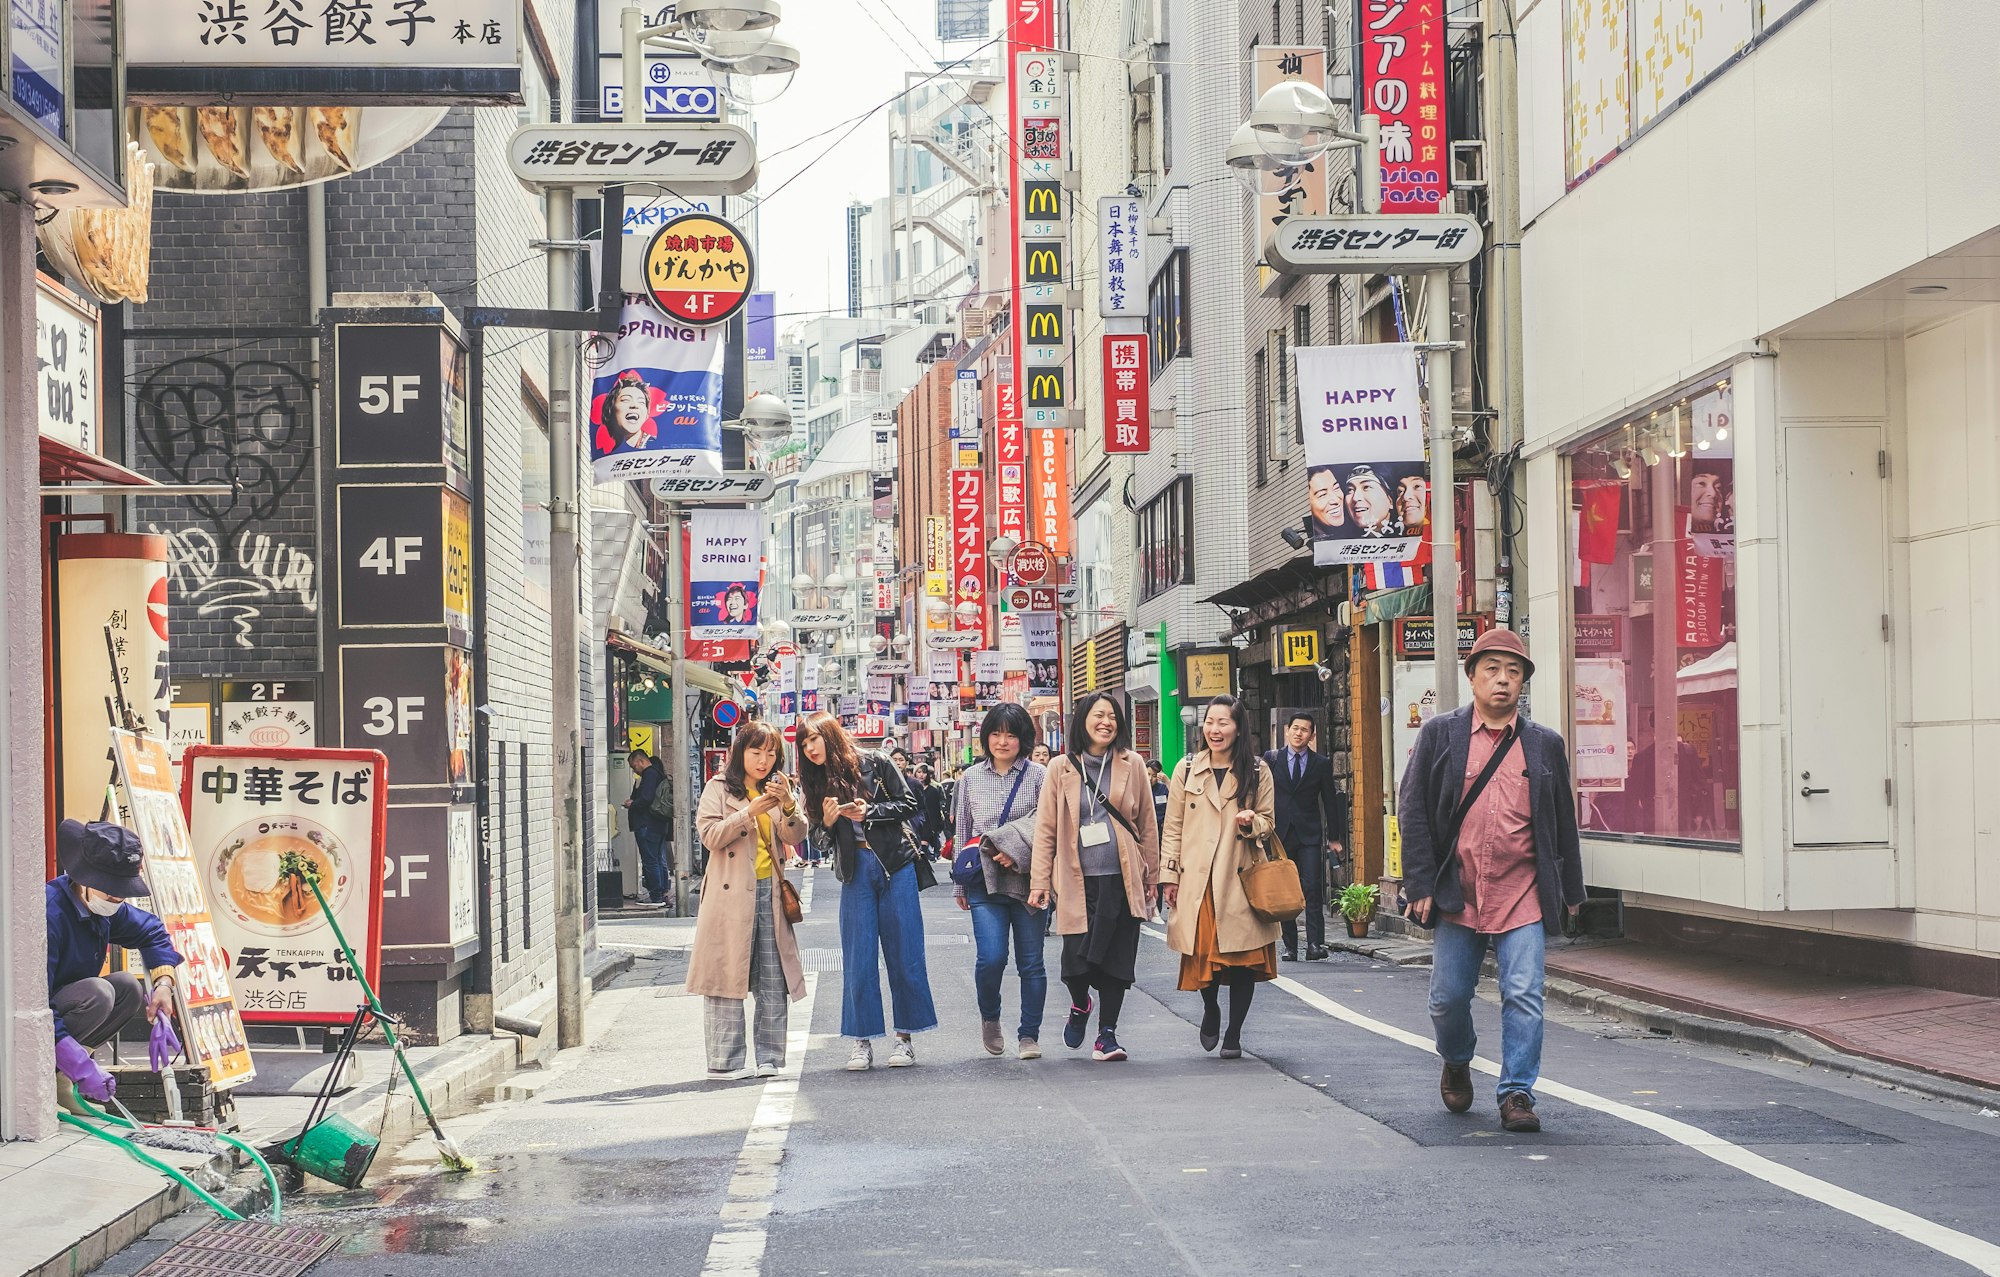 Typical street in Tokyo